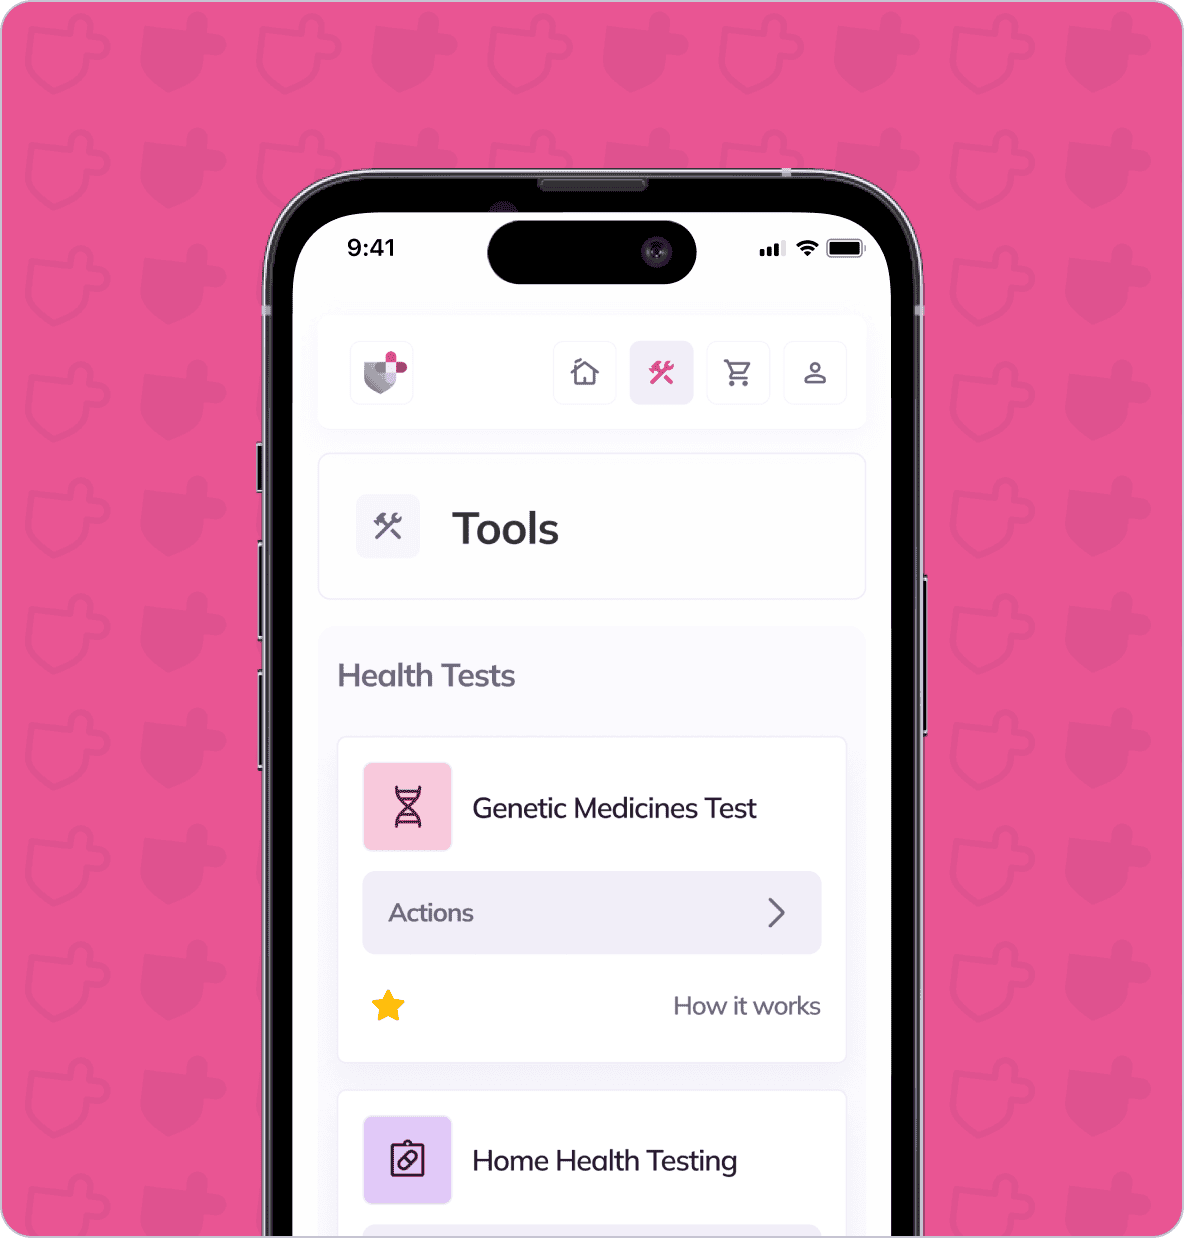 A smartphone screen displaying a health app's "Tools" section with options for genetic medicines test and home health testing. The background is pink with a shield pattern.